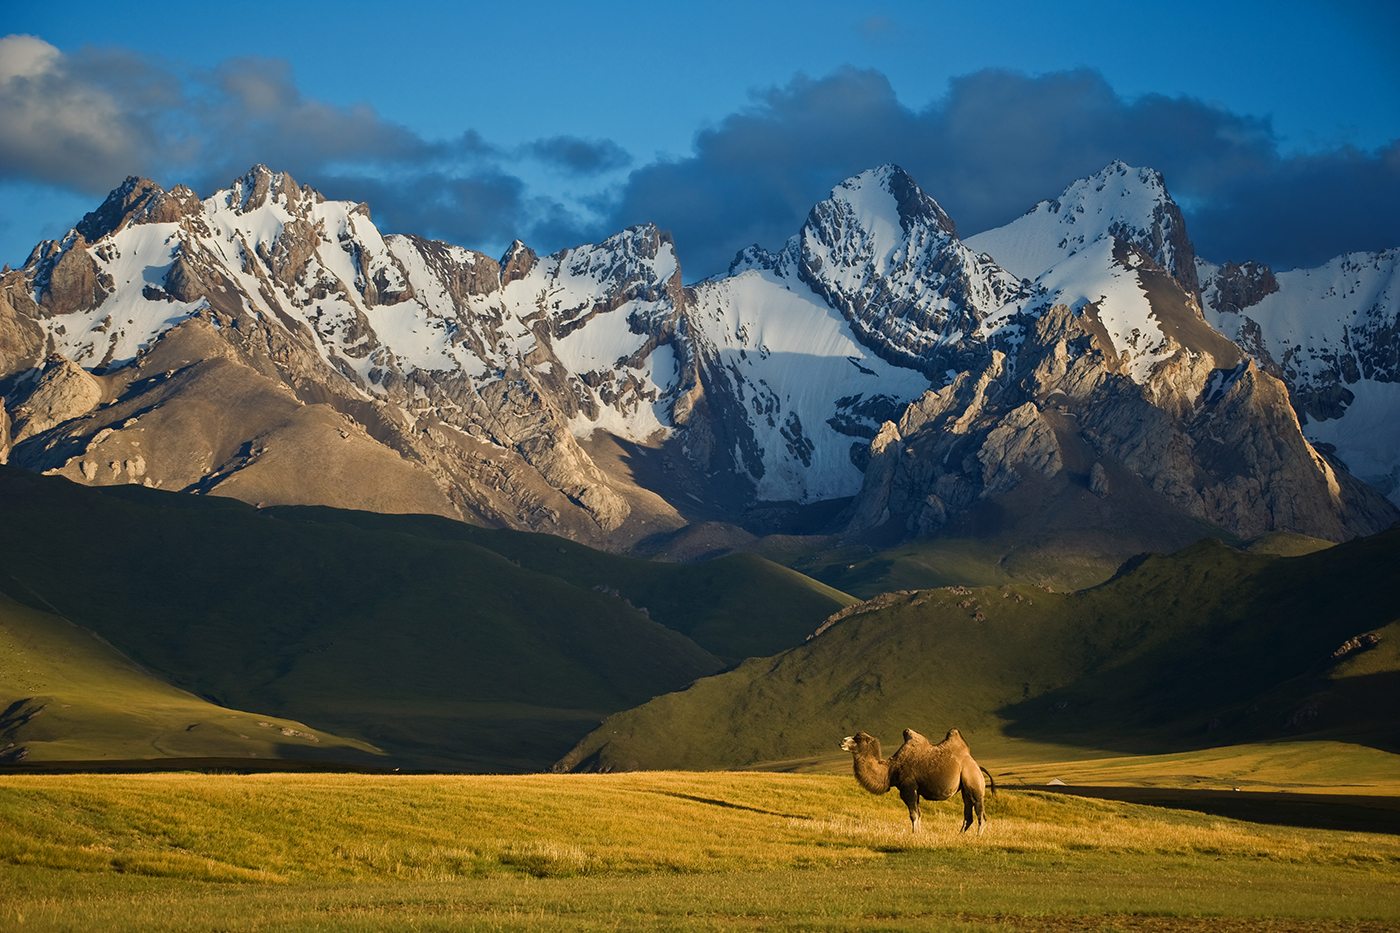 Sary-Beles mountains in Kyrgyzstan